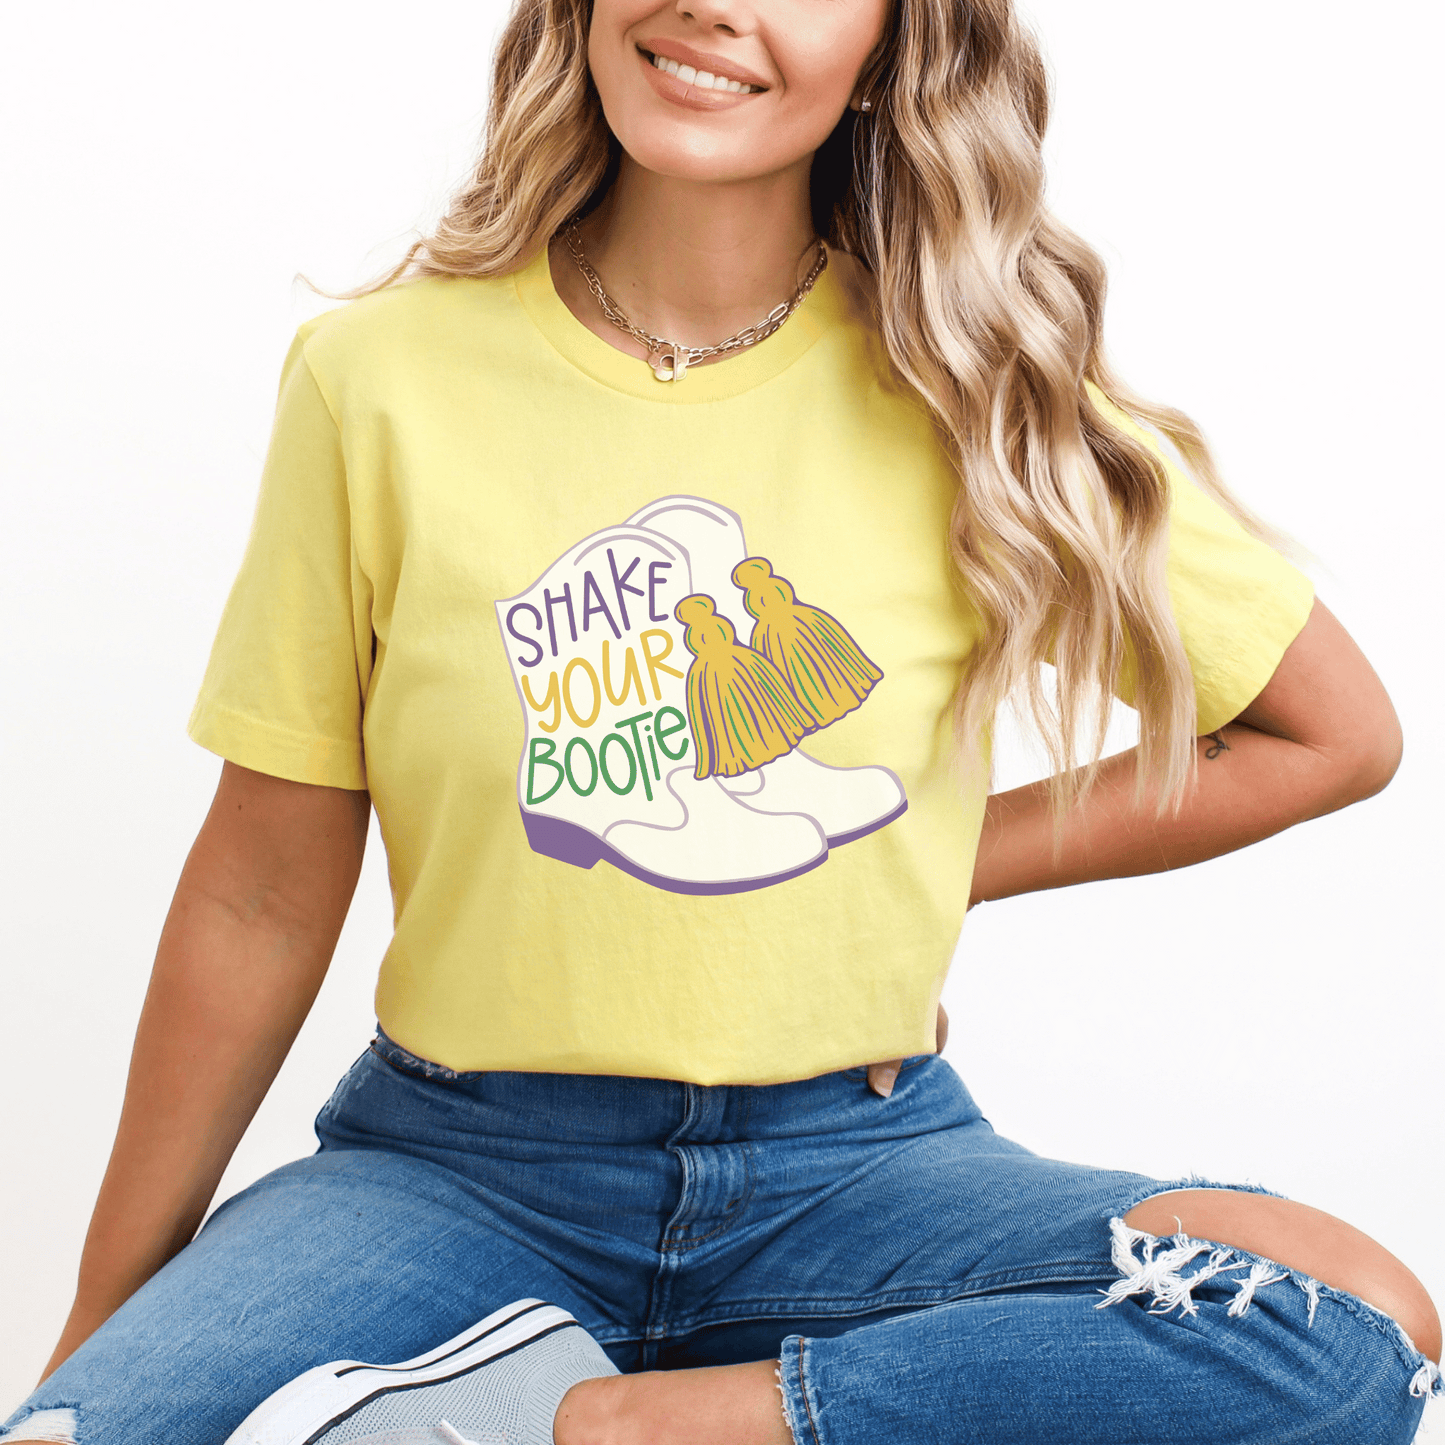 Womens funny yellow mardi gras shirt saying shake your bootie with an image of majorette boots